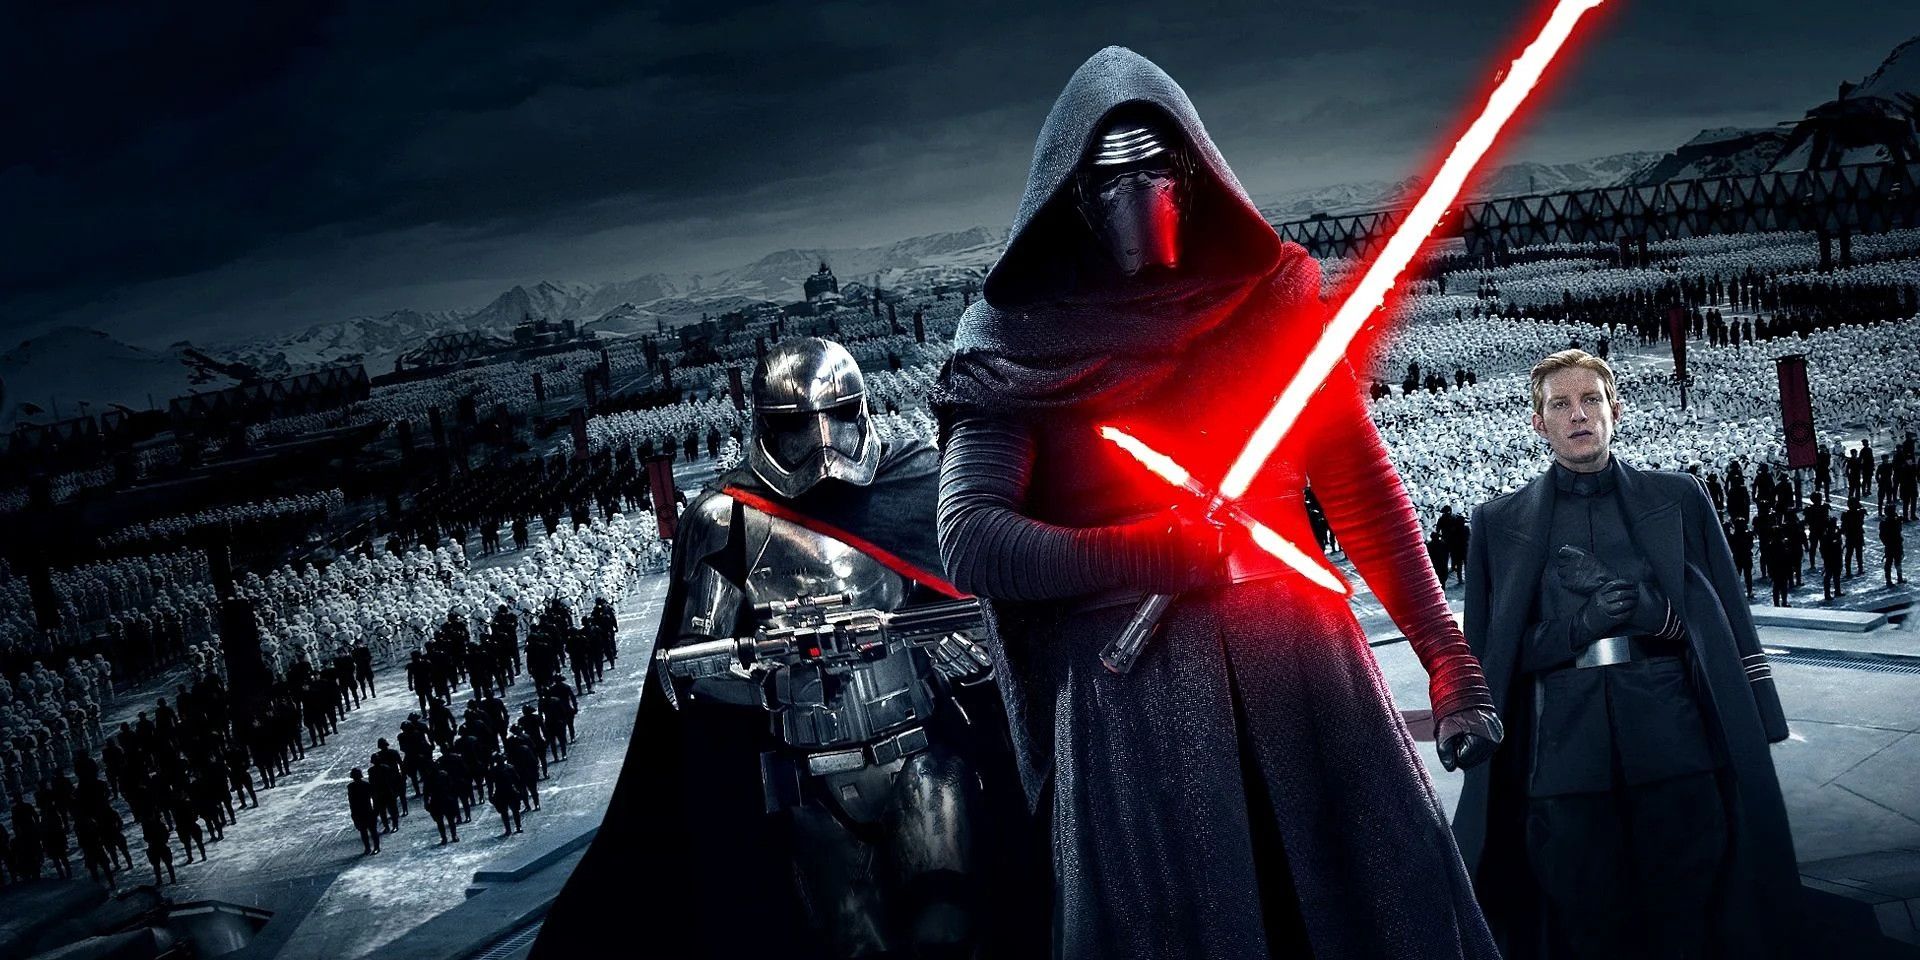 Imagine If Ben Didn’t Become Kylo Ren: How Would Star Wars Have Changed?